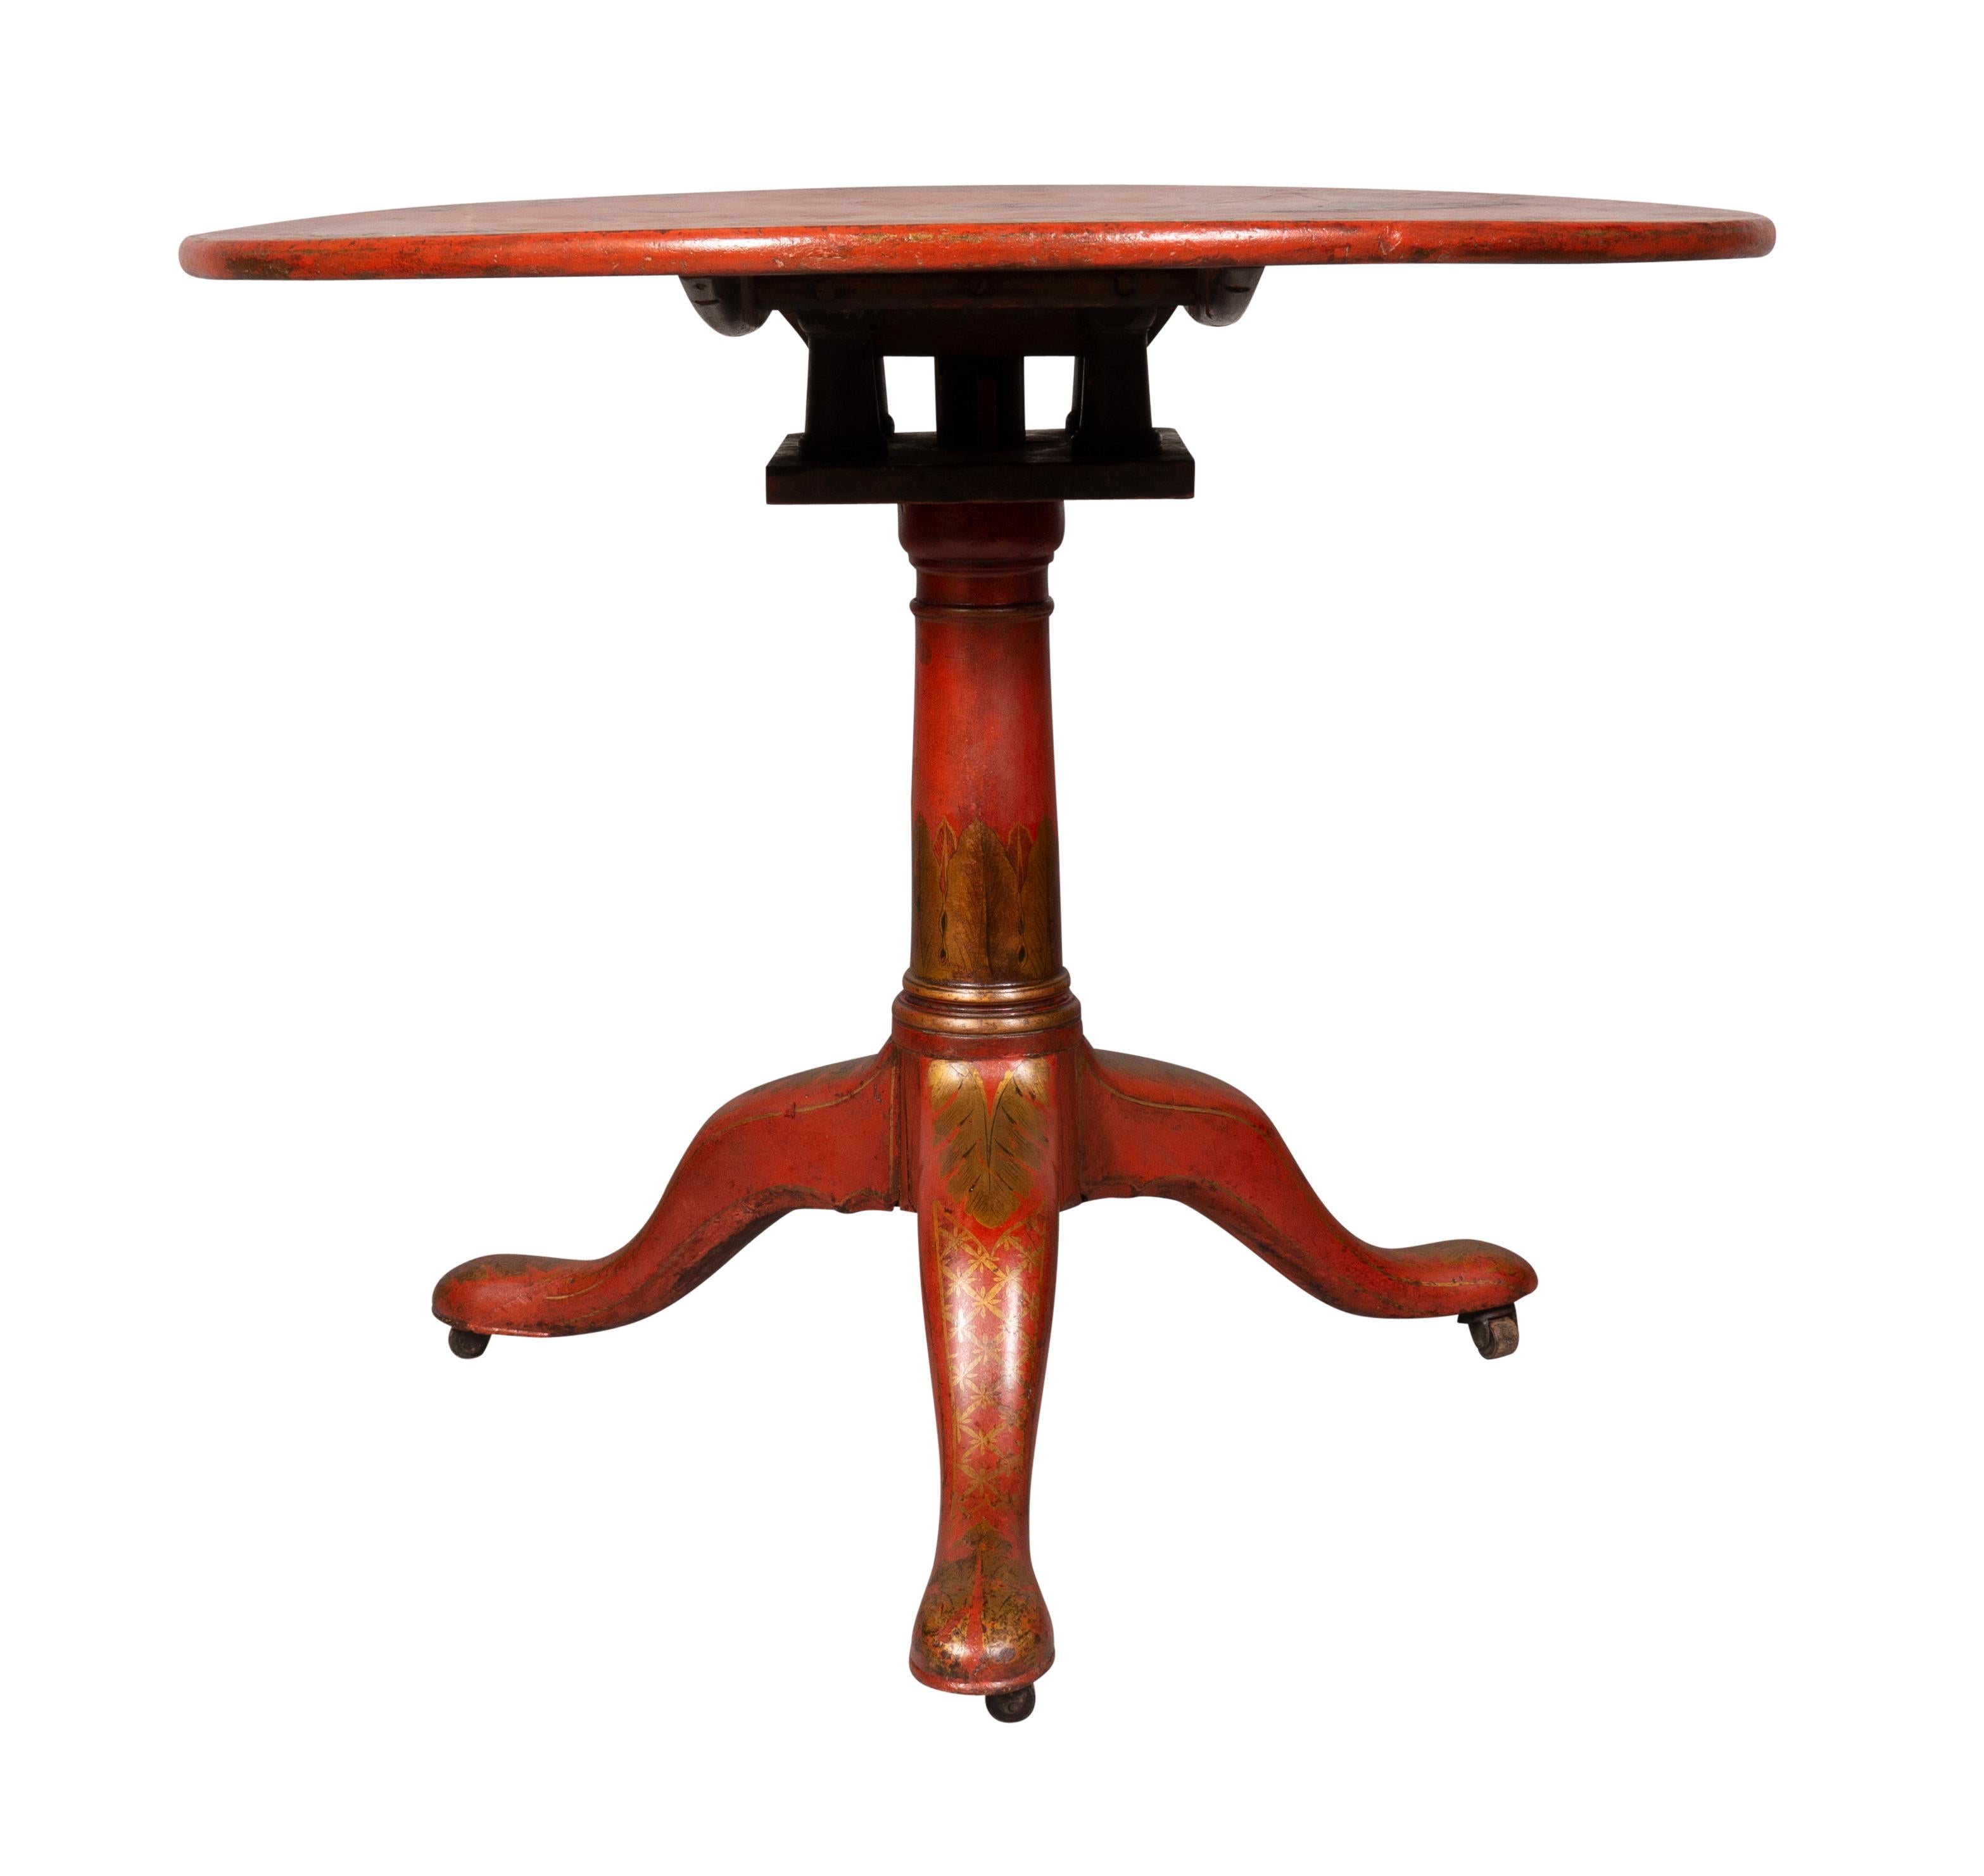 Circular hinged top with chinoiserie decoration on a turned support and three cabriole legs and pad feet.